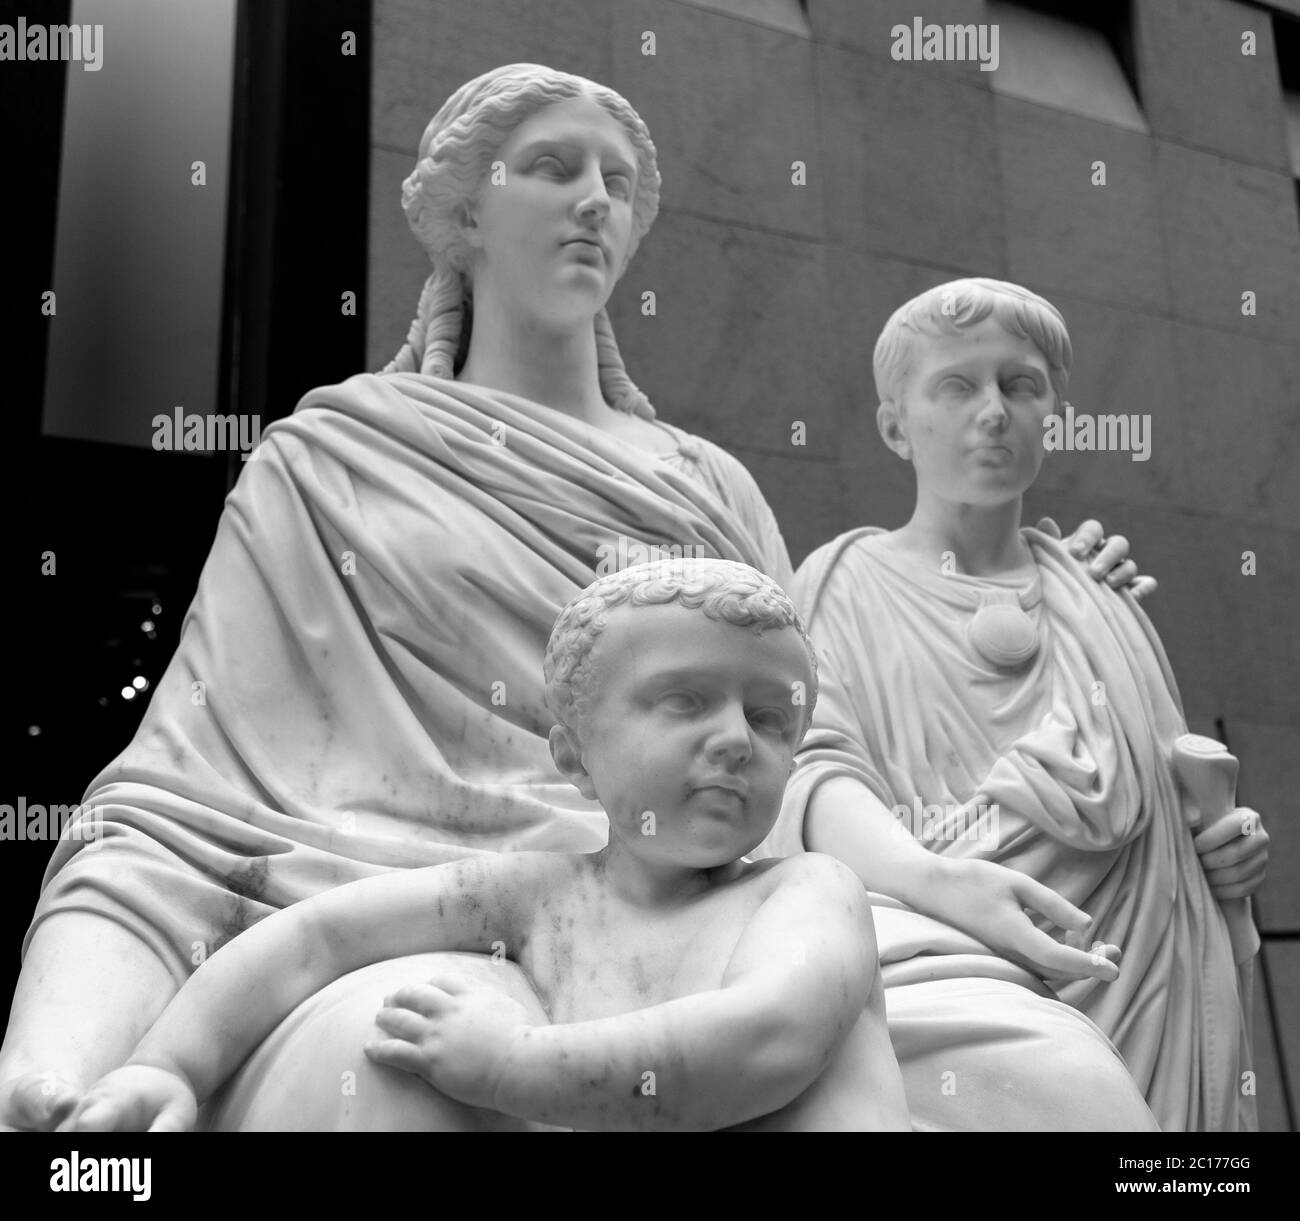 Child greek statue Black and White Stock Photos & Images - Alamy